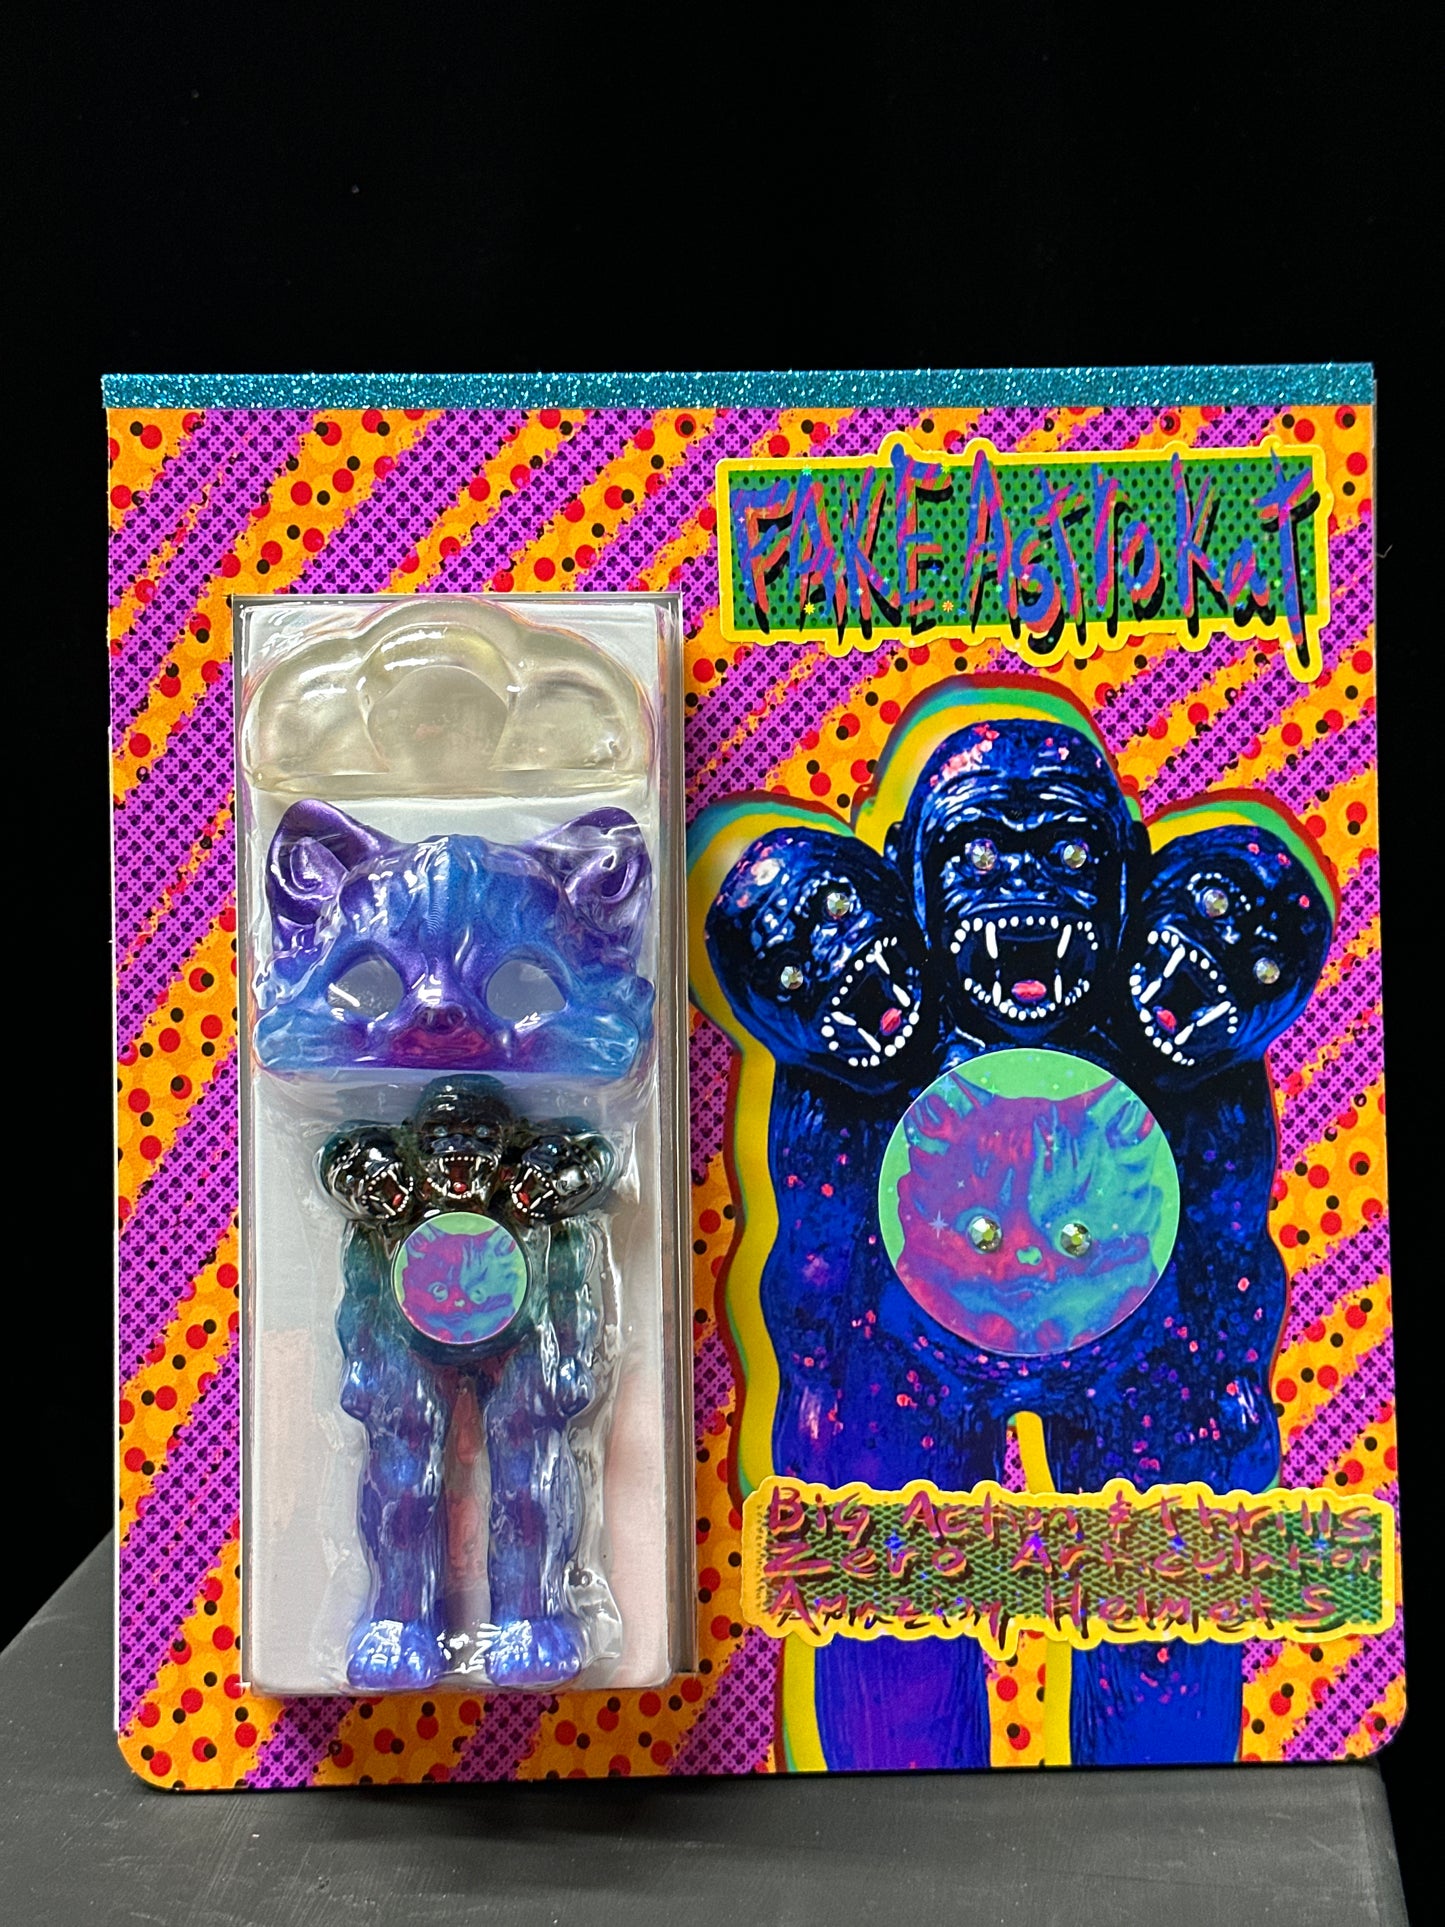 FAKE AstroKat: Teal/Blue Glitter (Limited Deluxe Package)